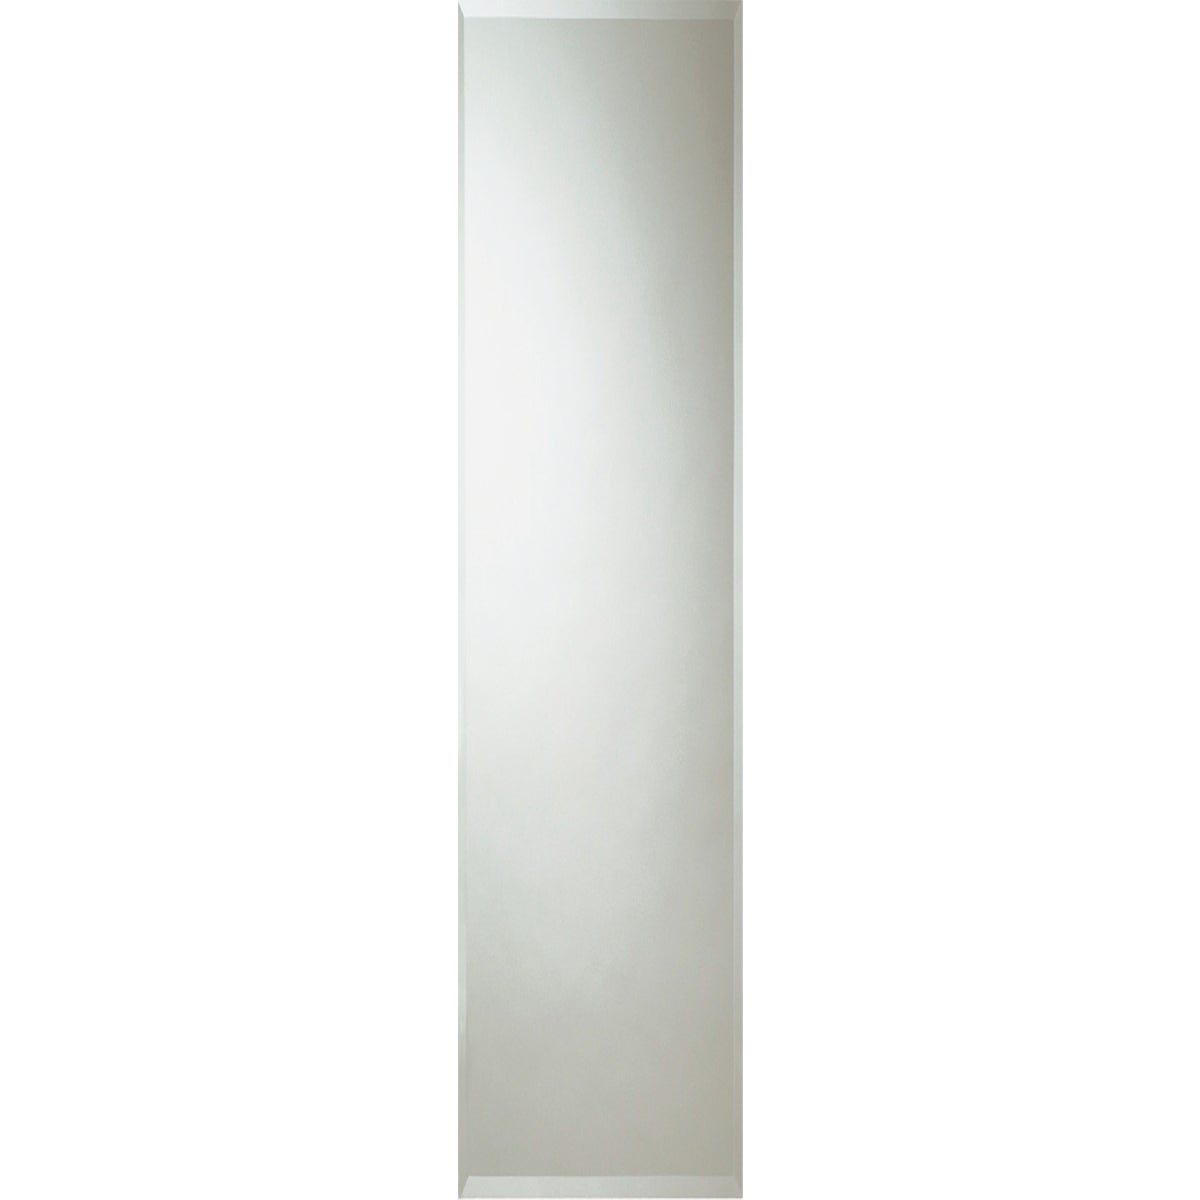 Item 278657, 16" x 60" frameless beveled edge door mirror by Erias has a 1/2" bevel and 